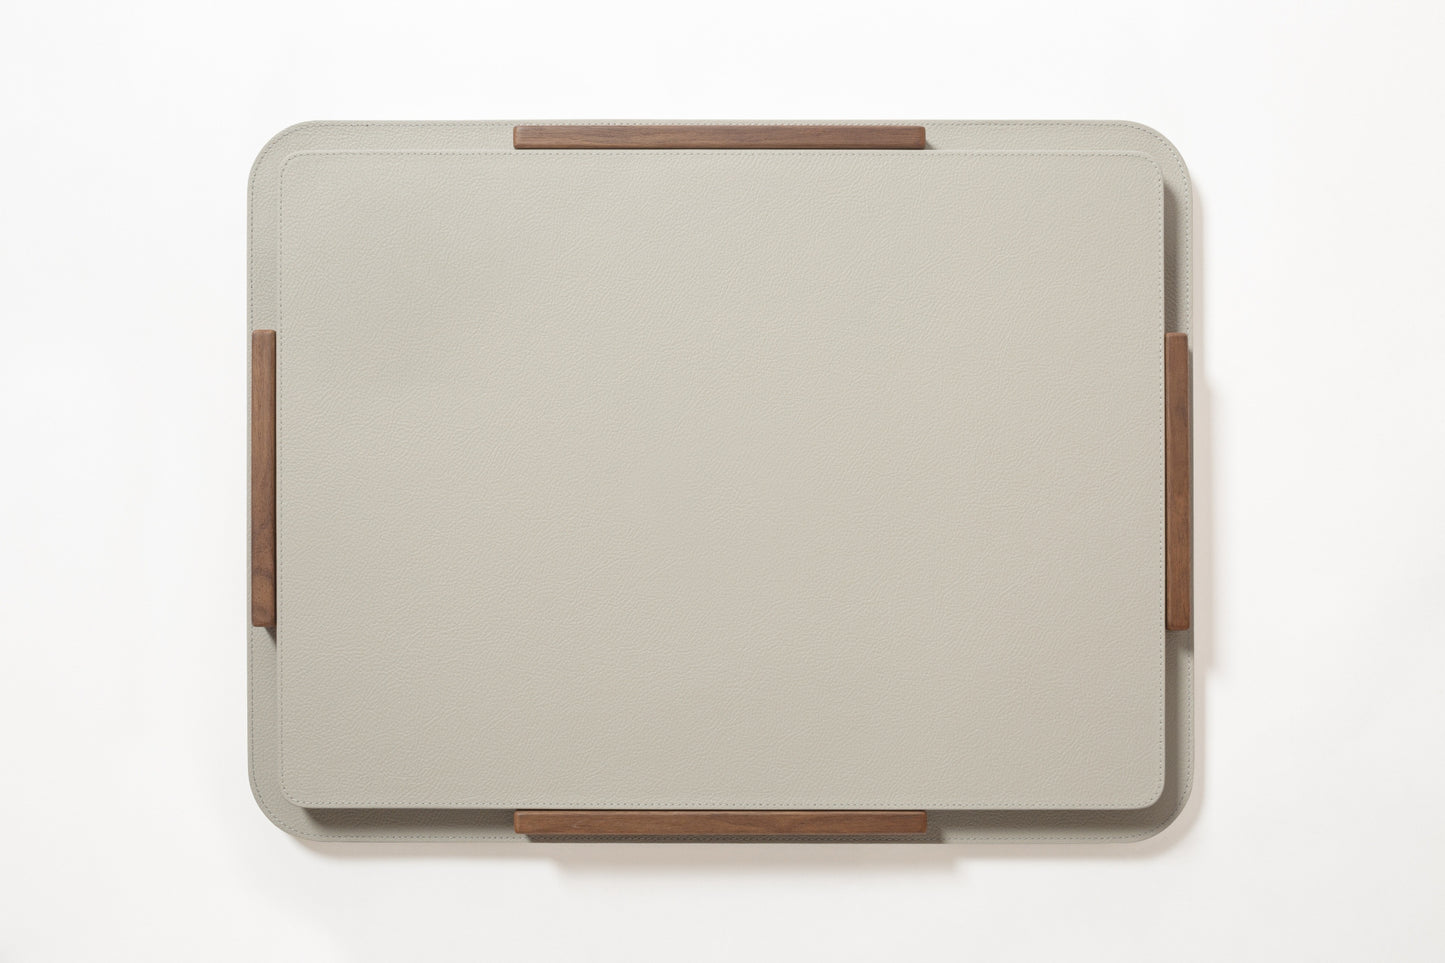 Giobagnara x Poltrona Frau Placemat Holder With 6 Placemats | All-Leather Placemats | Leather-Covered Placemat Holder with Walnut Wood Inserts | Stylish and Elegant Dining Accessories | Explore a Range of Luxury Home Decor at 2Jour Concierge, #1 luxury high-end gift & lifestyle shop